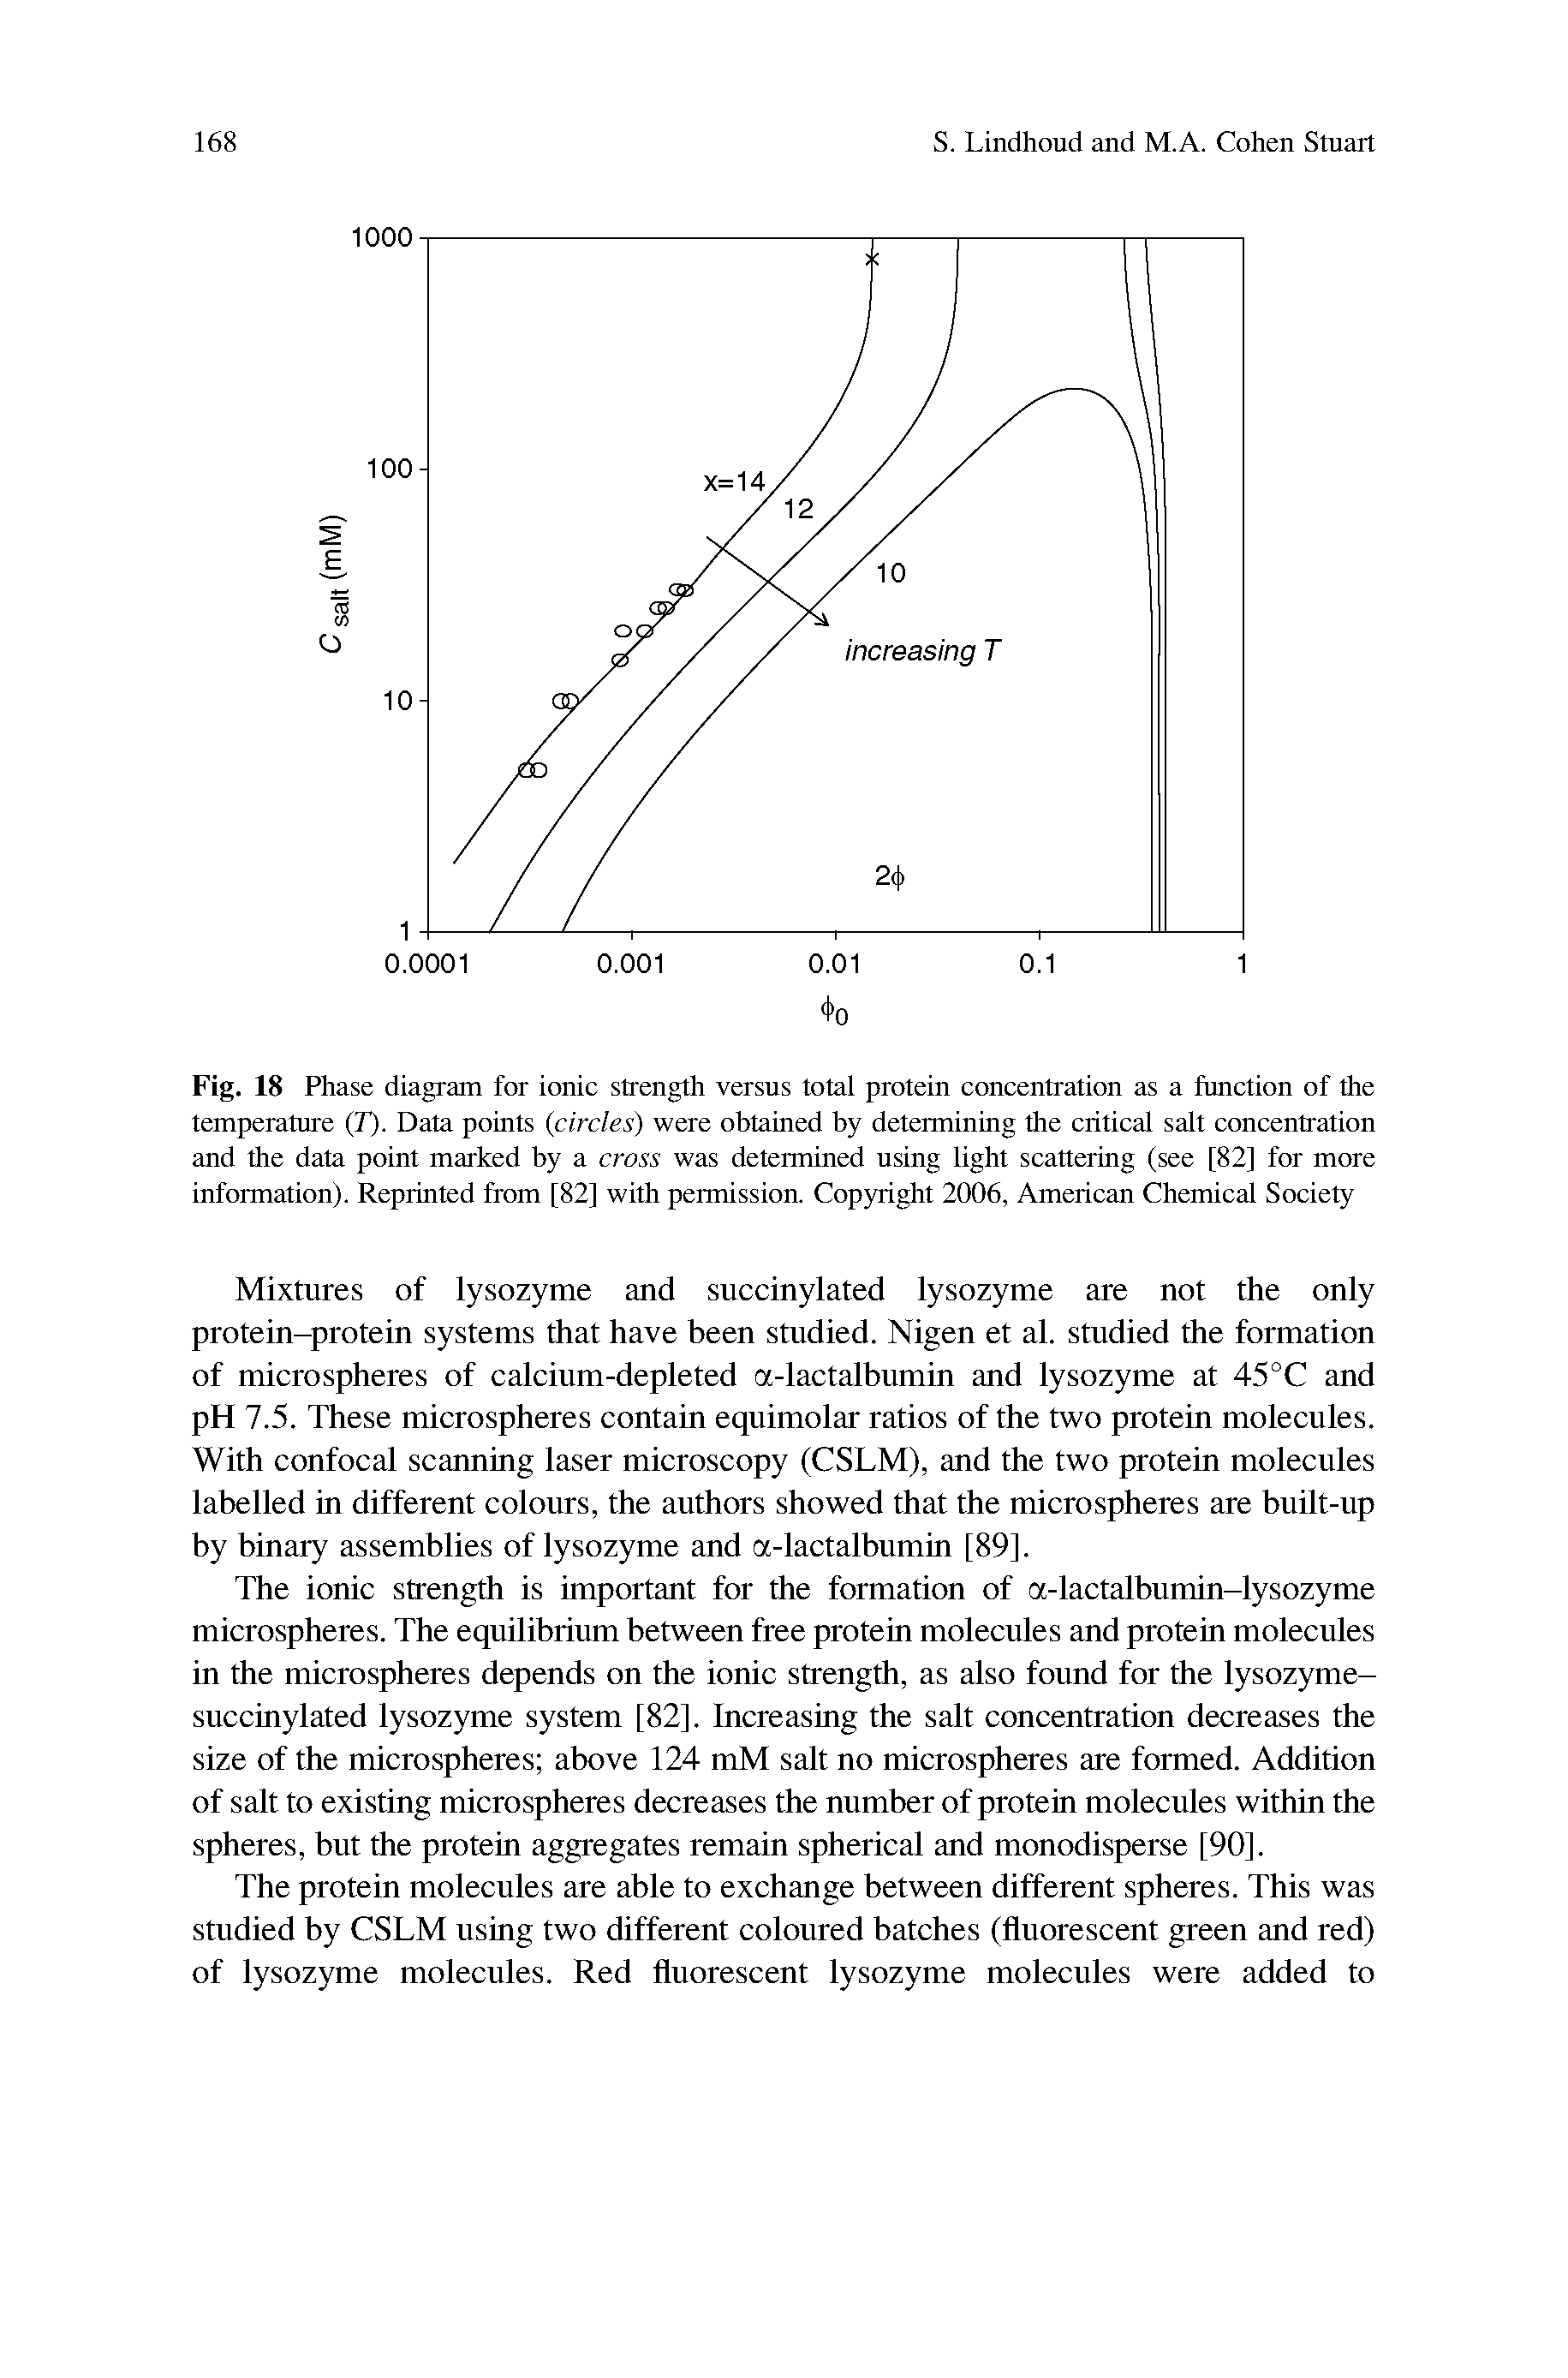 Fig. 18 Phase diagram for ionic strength versus total protein concentration as a function of the temperature (I). Data points circles) were obtained by determining the critical salt concentration and the data point marked by a cross was determined using light scattering (see [82] for more Information). Reprinted from [82] with permission. Copyright 2006, American Chemical Society...